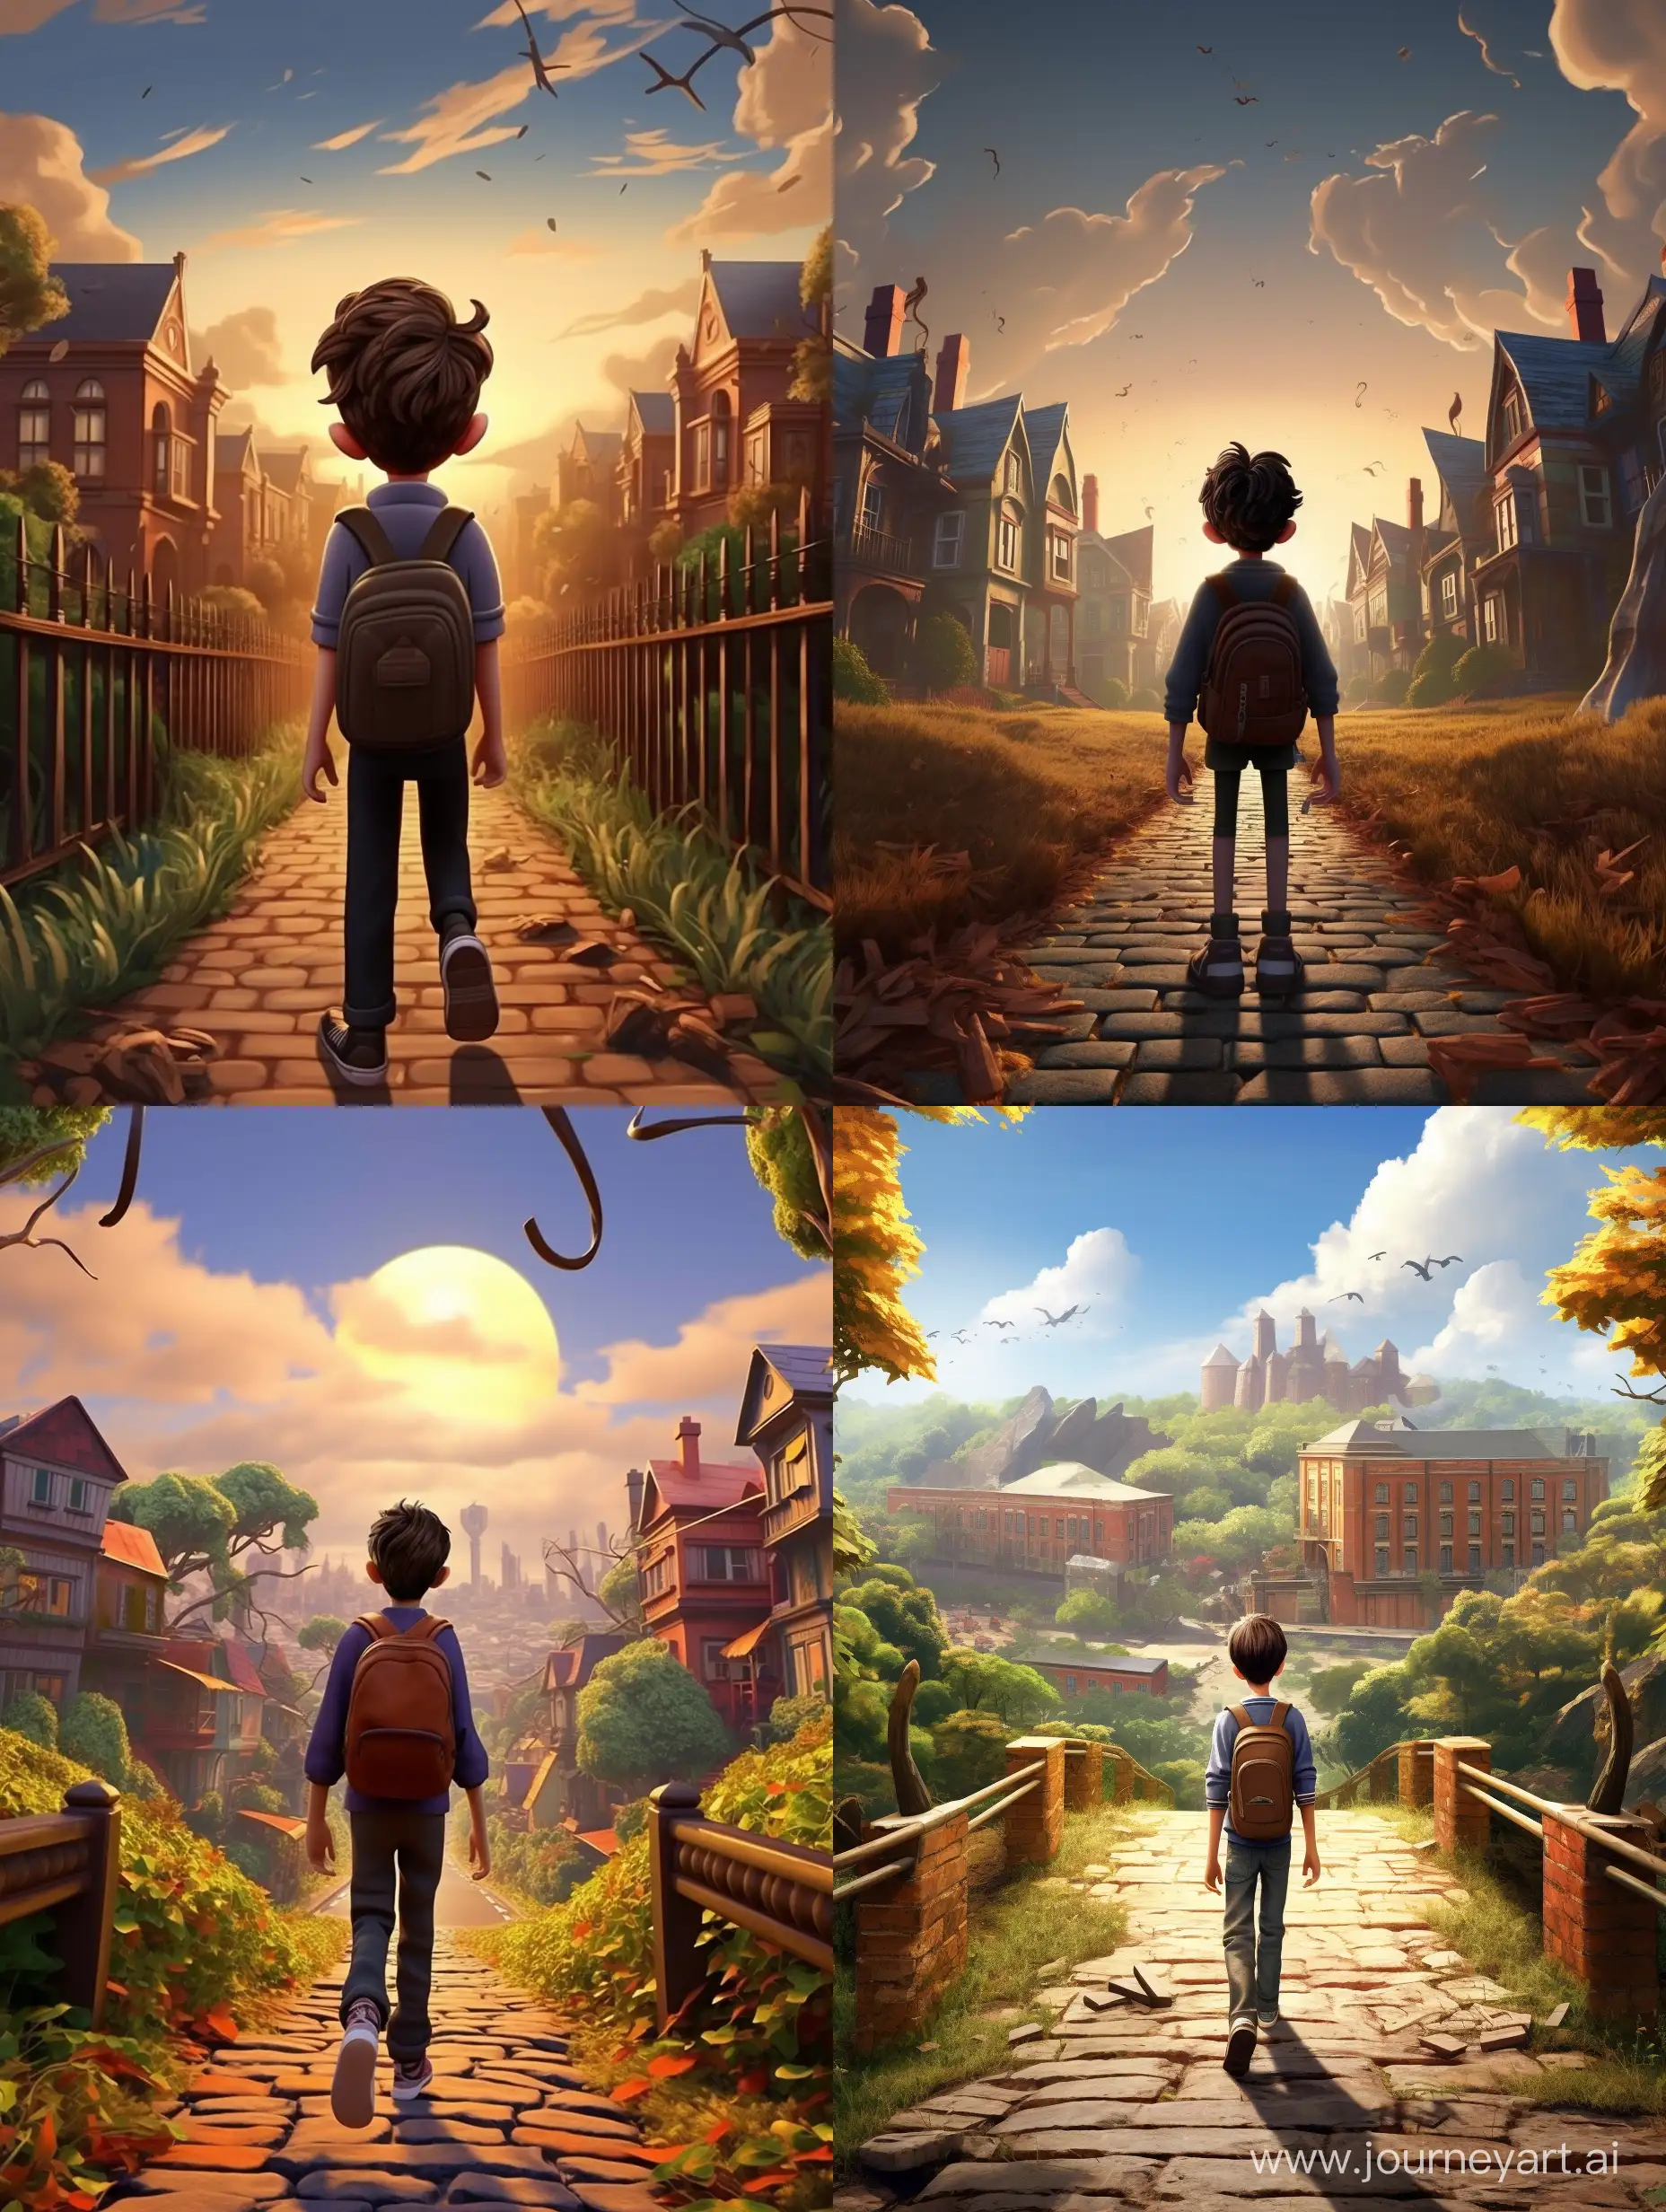 Boy-Walking-Along-Path-with-PixarStyle-School-in-Background